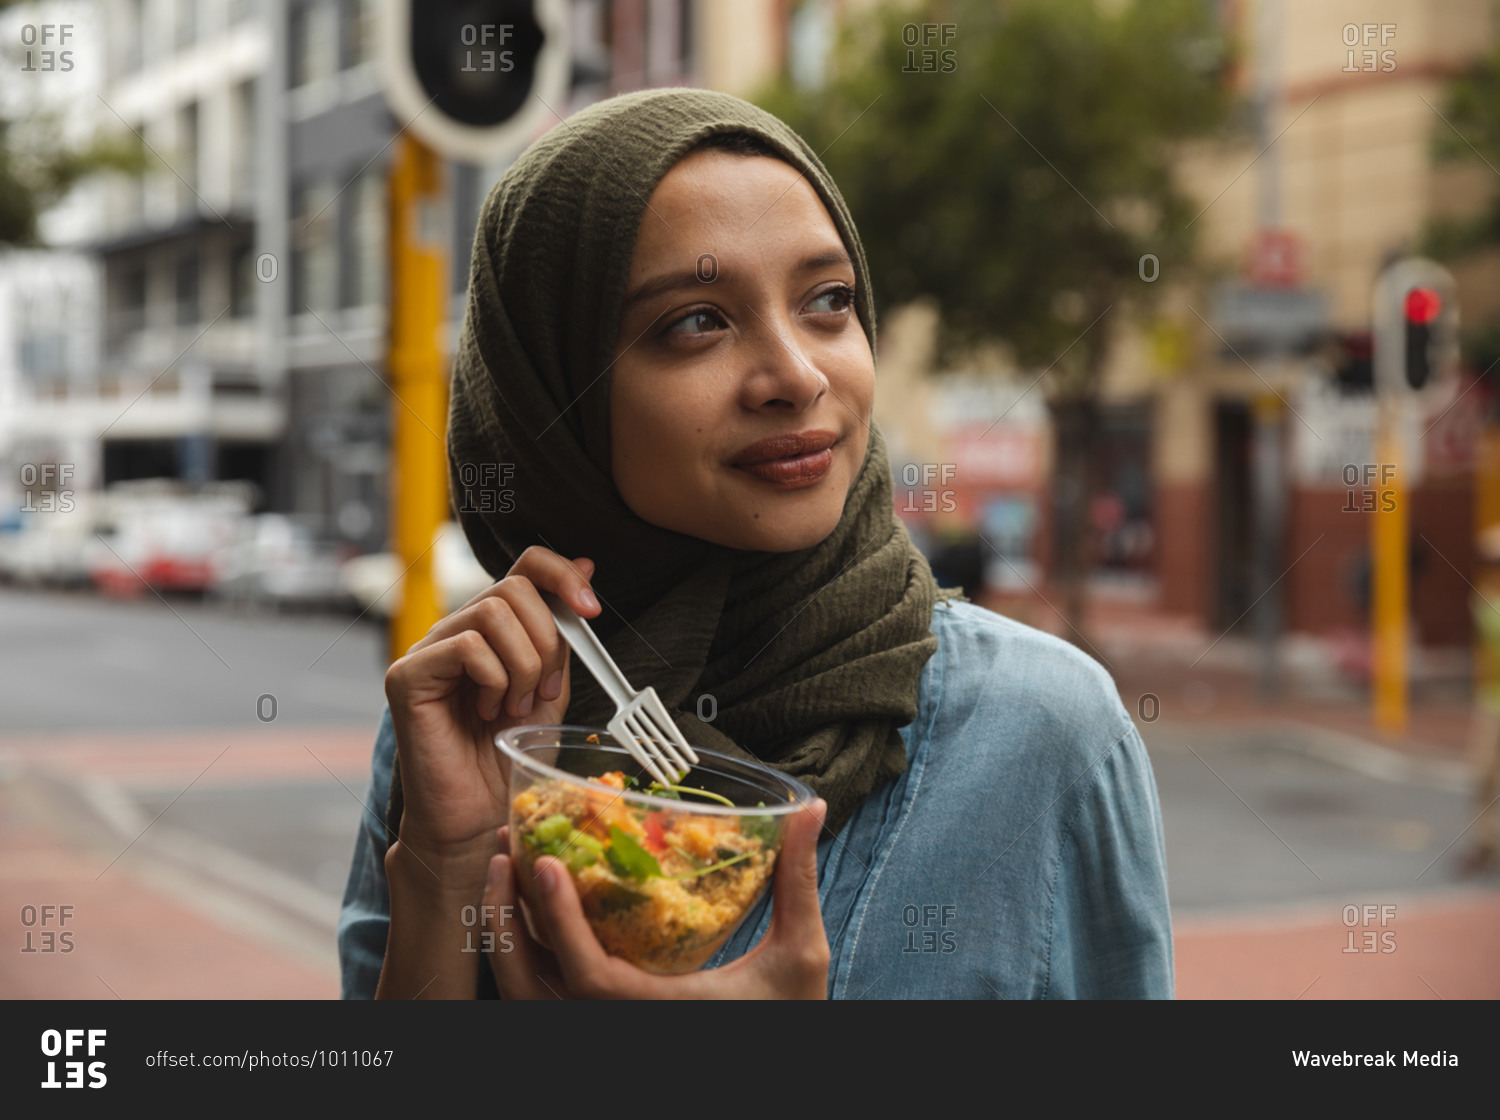 Mixed race woman wearing hijab out and about in the city, standing in street eating takeaway lunch holding bowl and fork, smiling. Commuter modern lifestyle.